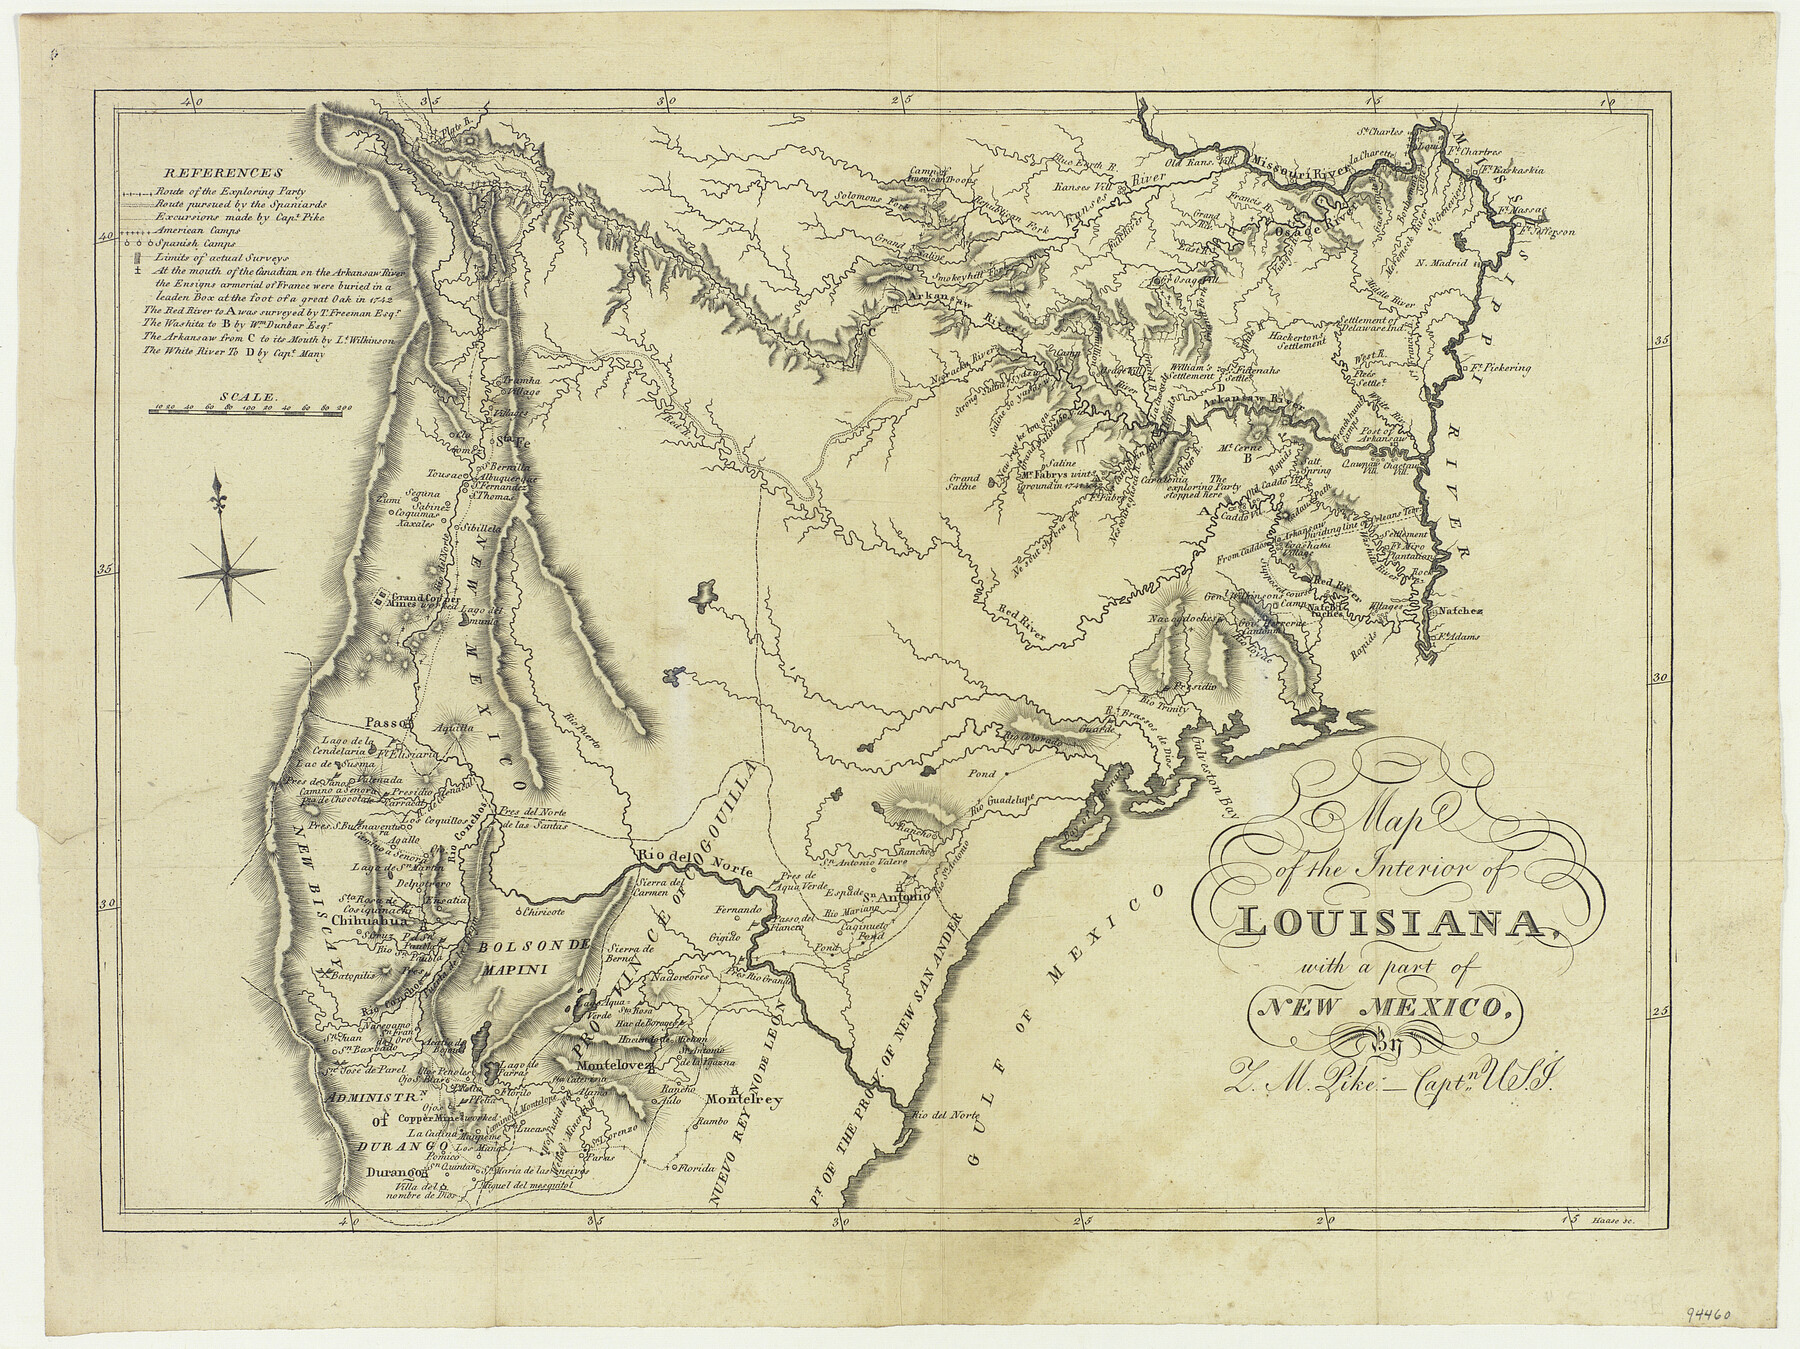 94460, Map of the Interior of Louisiana with a part of New Mexico, General Map Collection